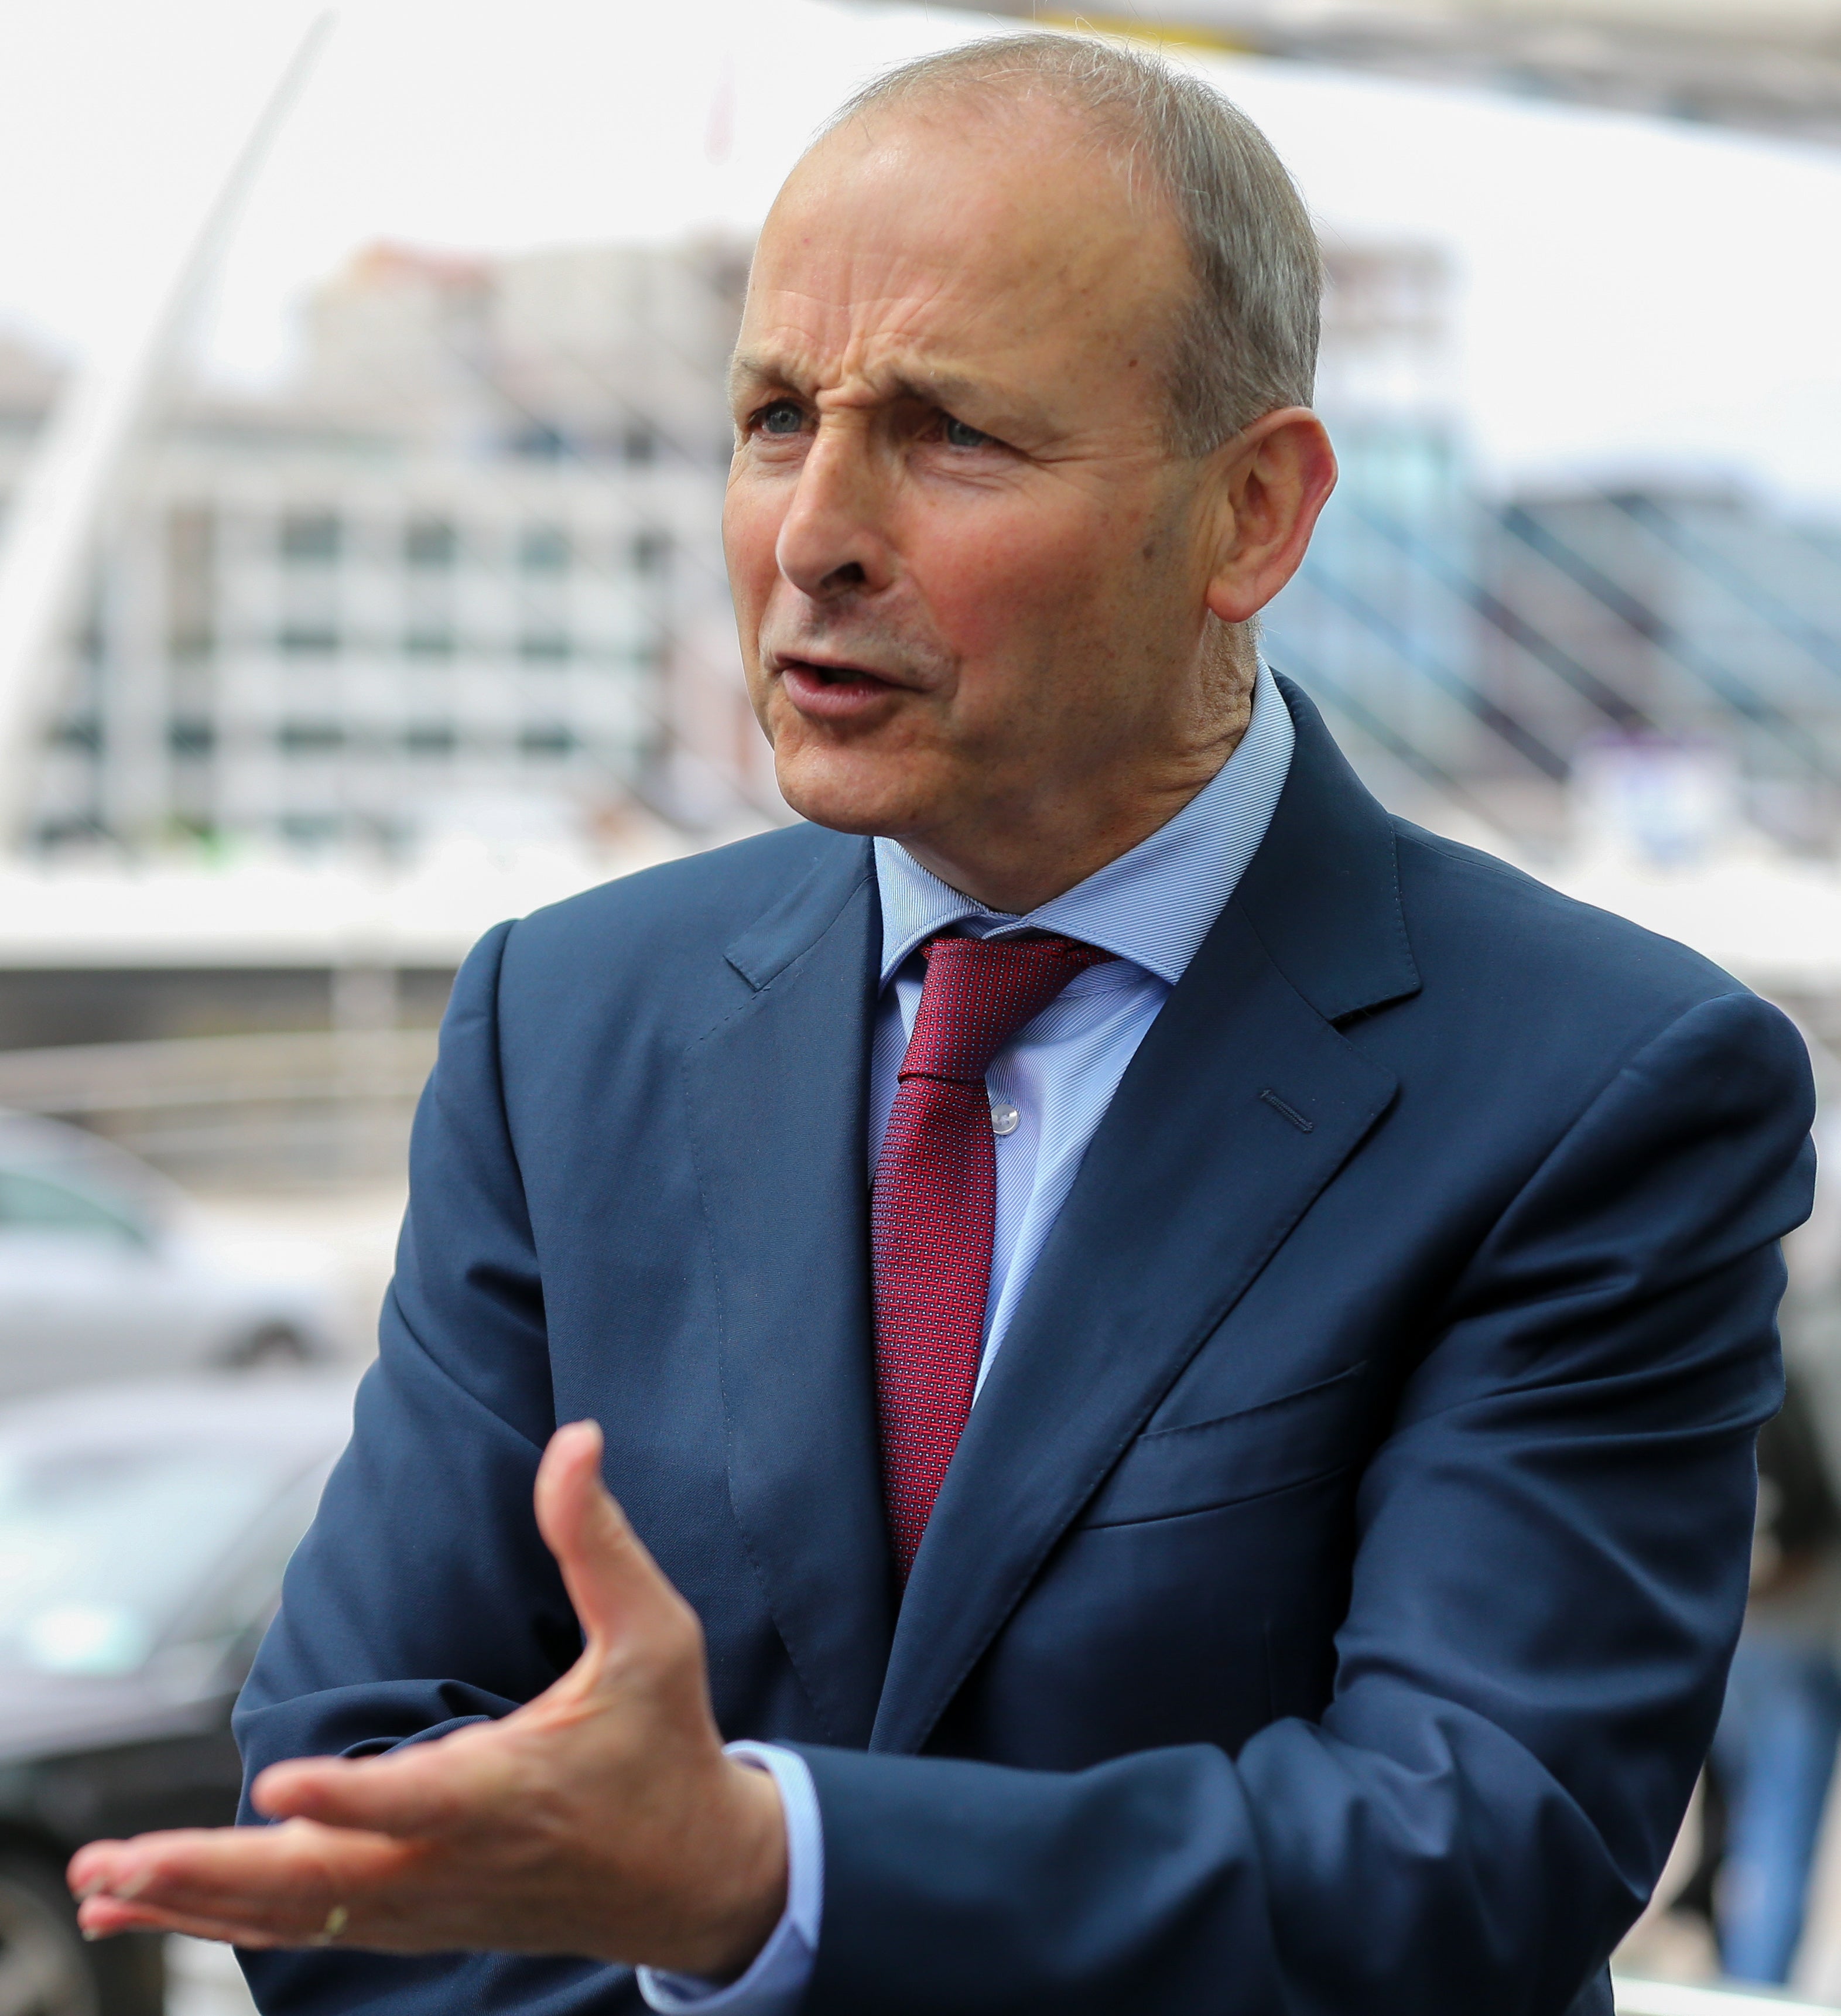 Micheal Martin says he wants to avoid a trade war